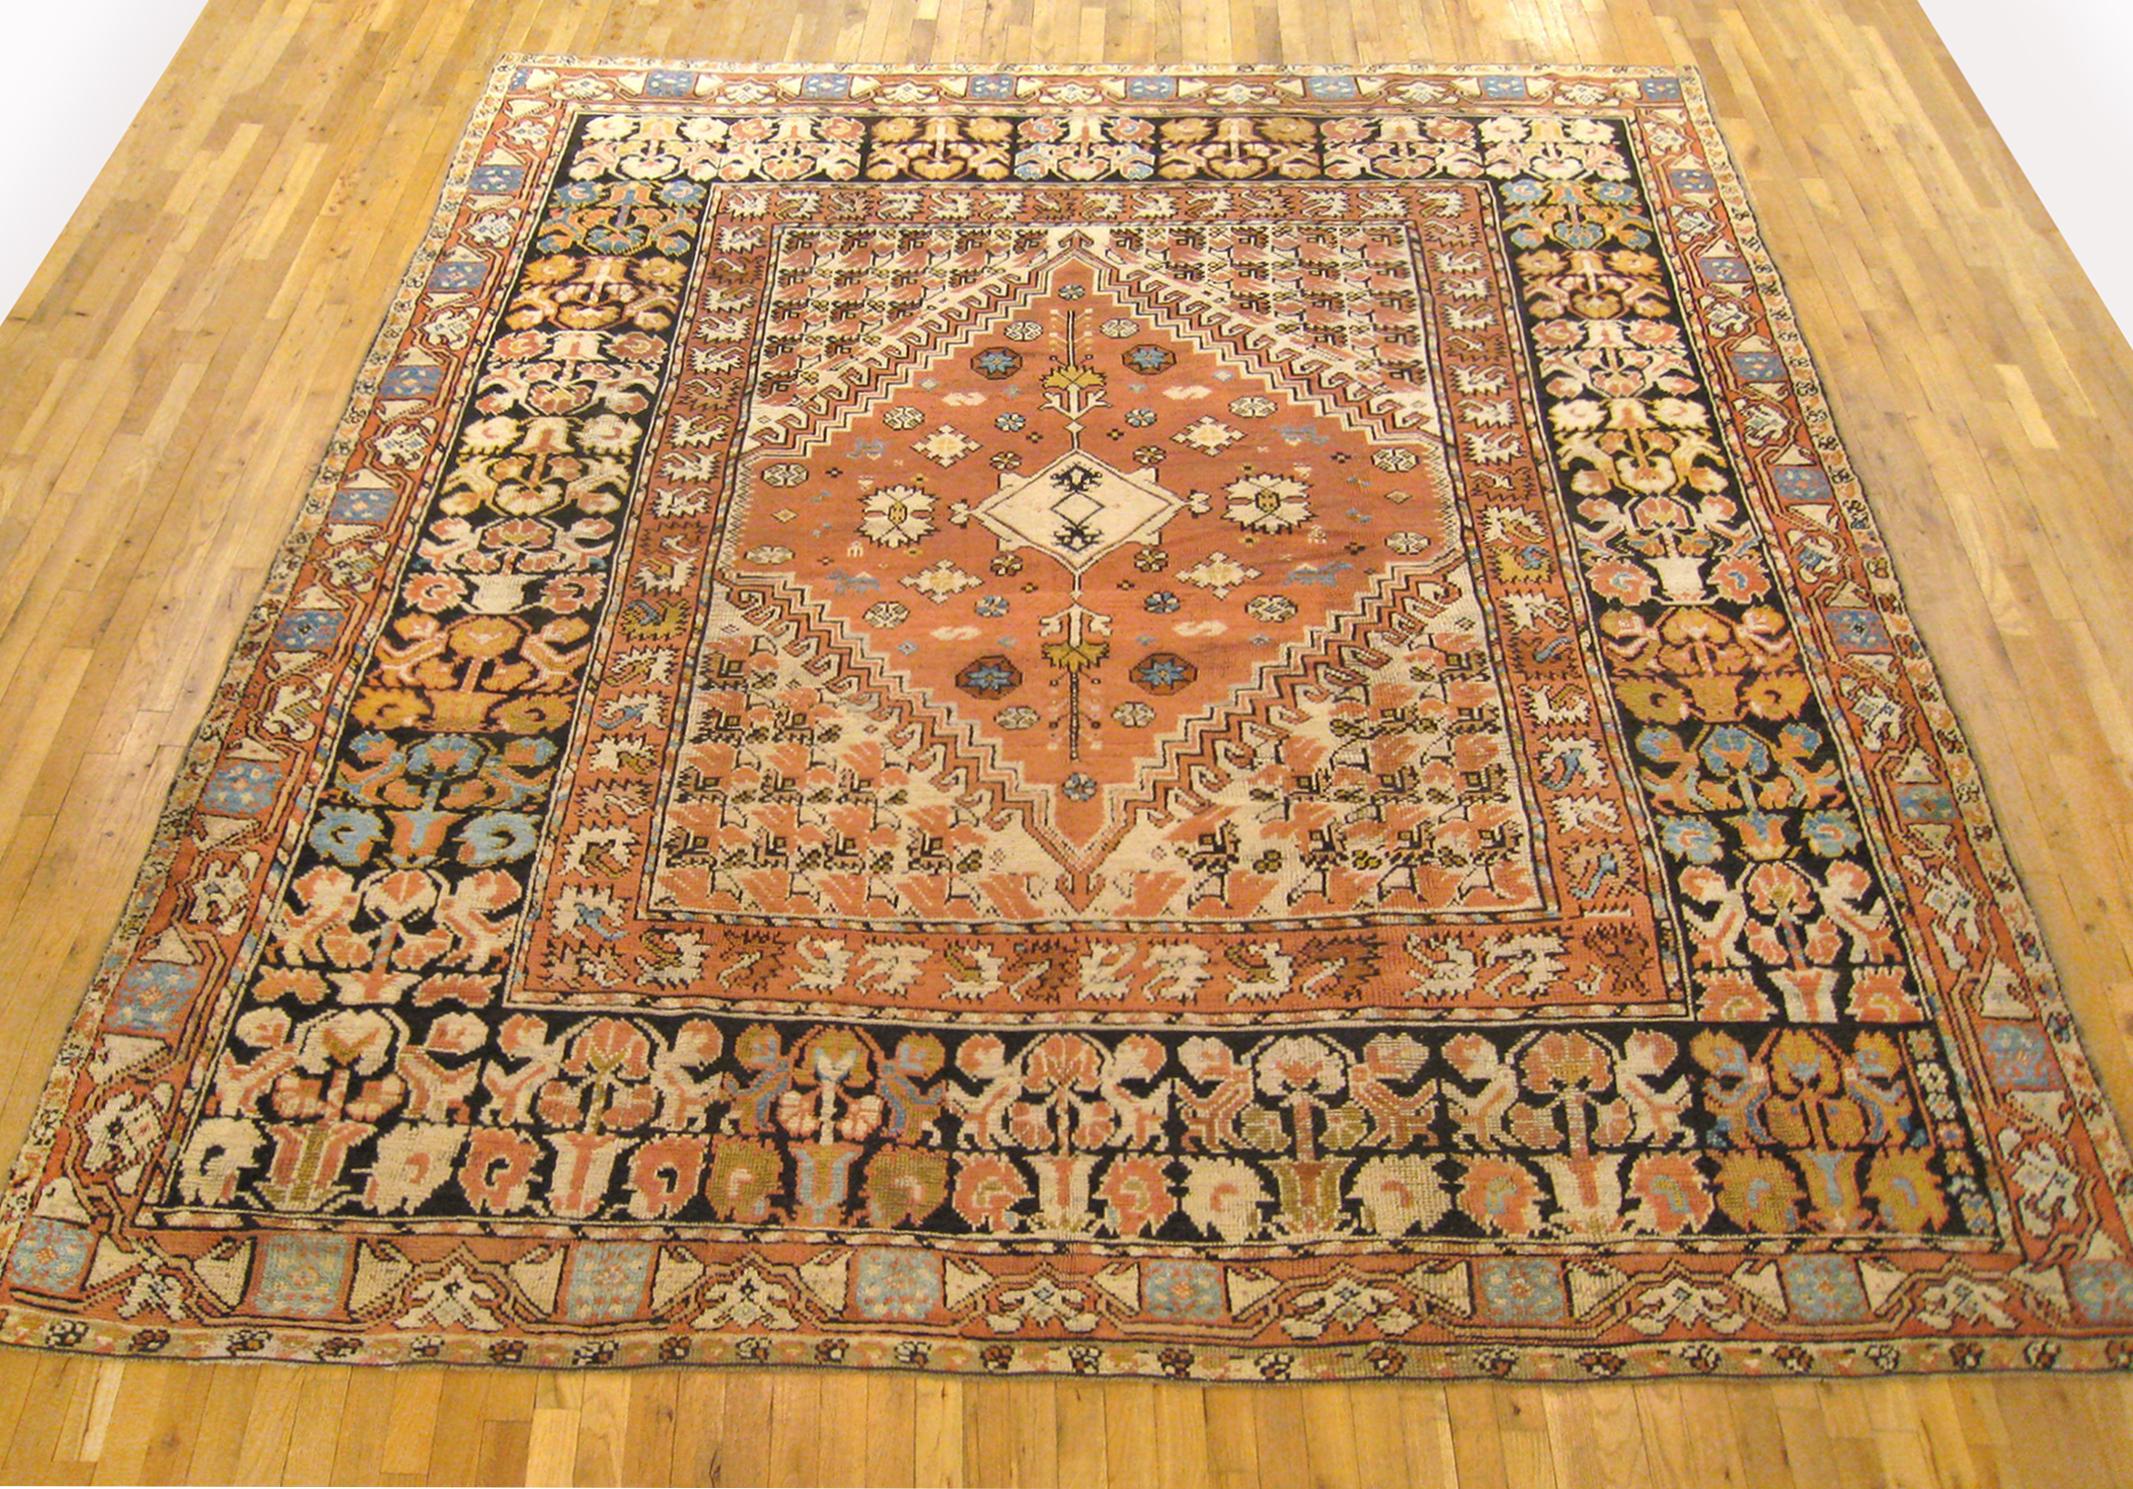 Antique Moroccan Rug, circa 1920, Room size. 

A one-of-a-kind antique Moroccan Rug, hand-knotted with medium thickness wool pile. This beautiful rug features a central medallion design on the rose primary field, within a black outer border. In